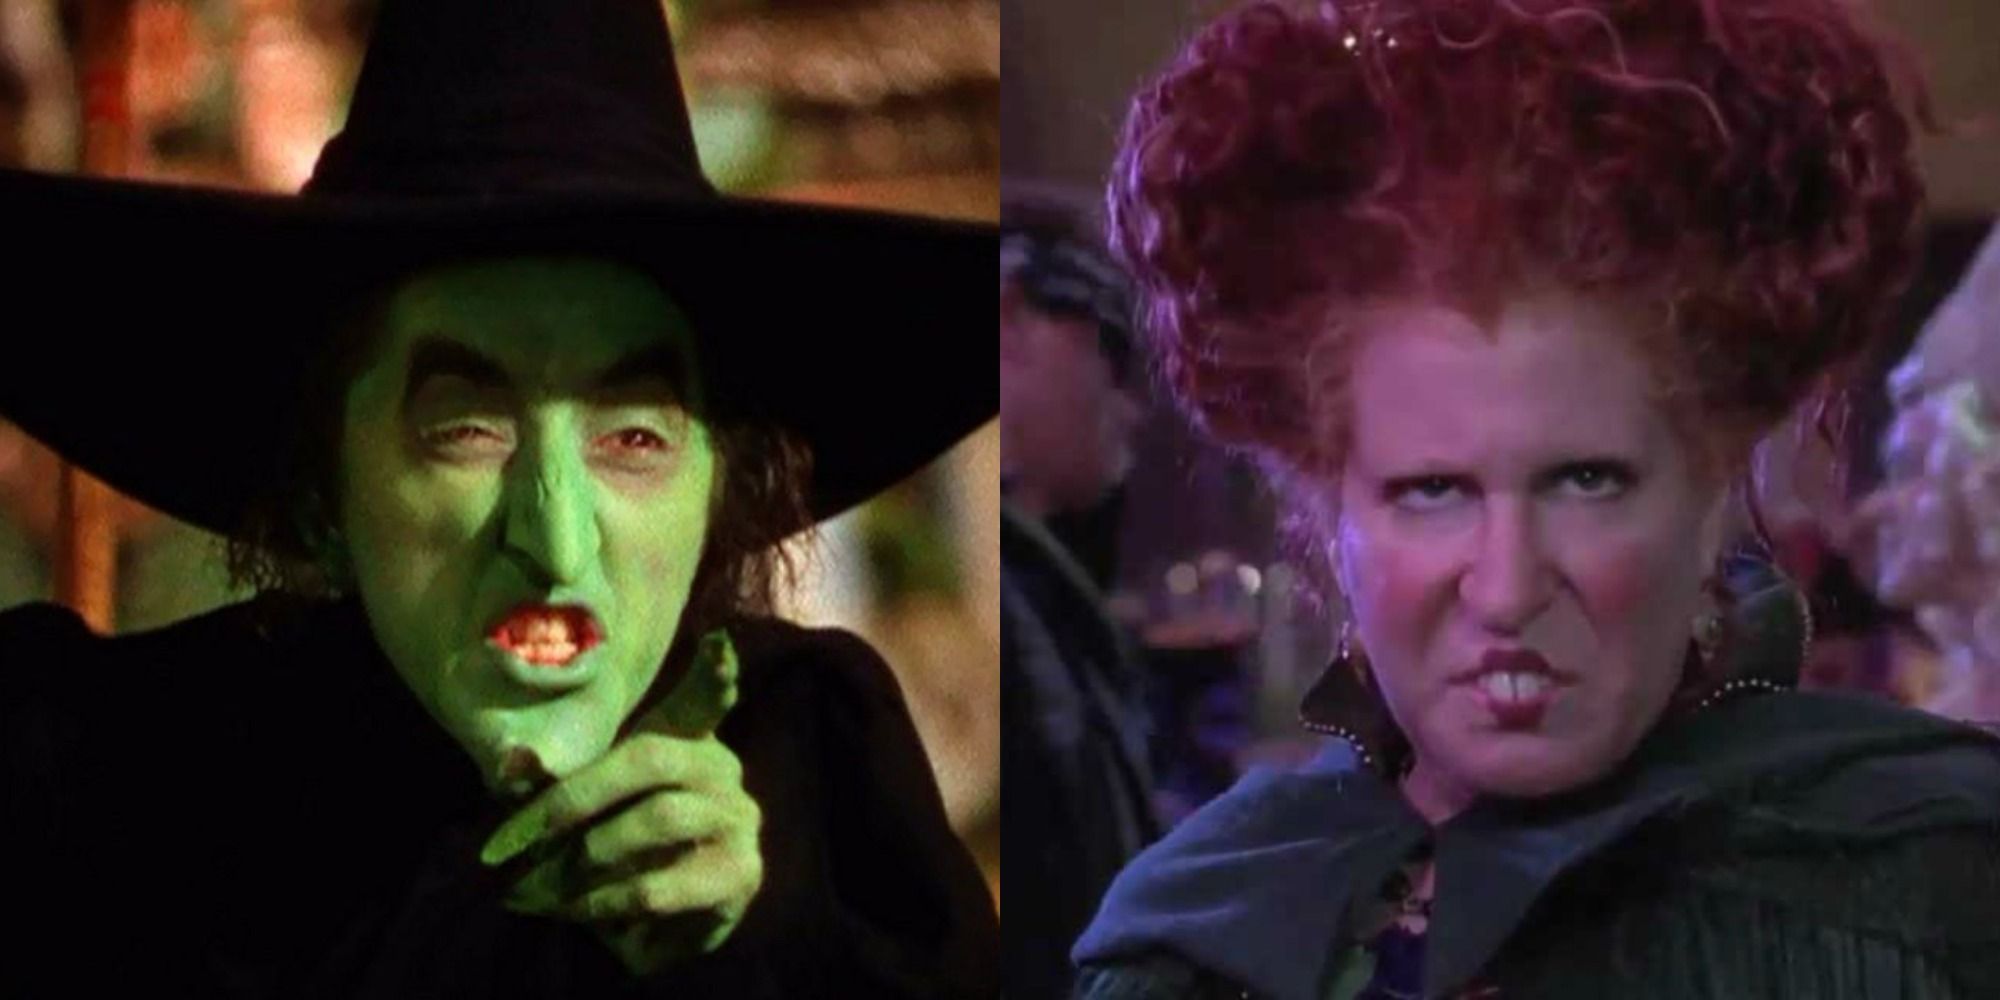 Two side by side images of the Wicked Witch of the West from Oz and Bette Midler in Hocus Pocus